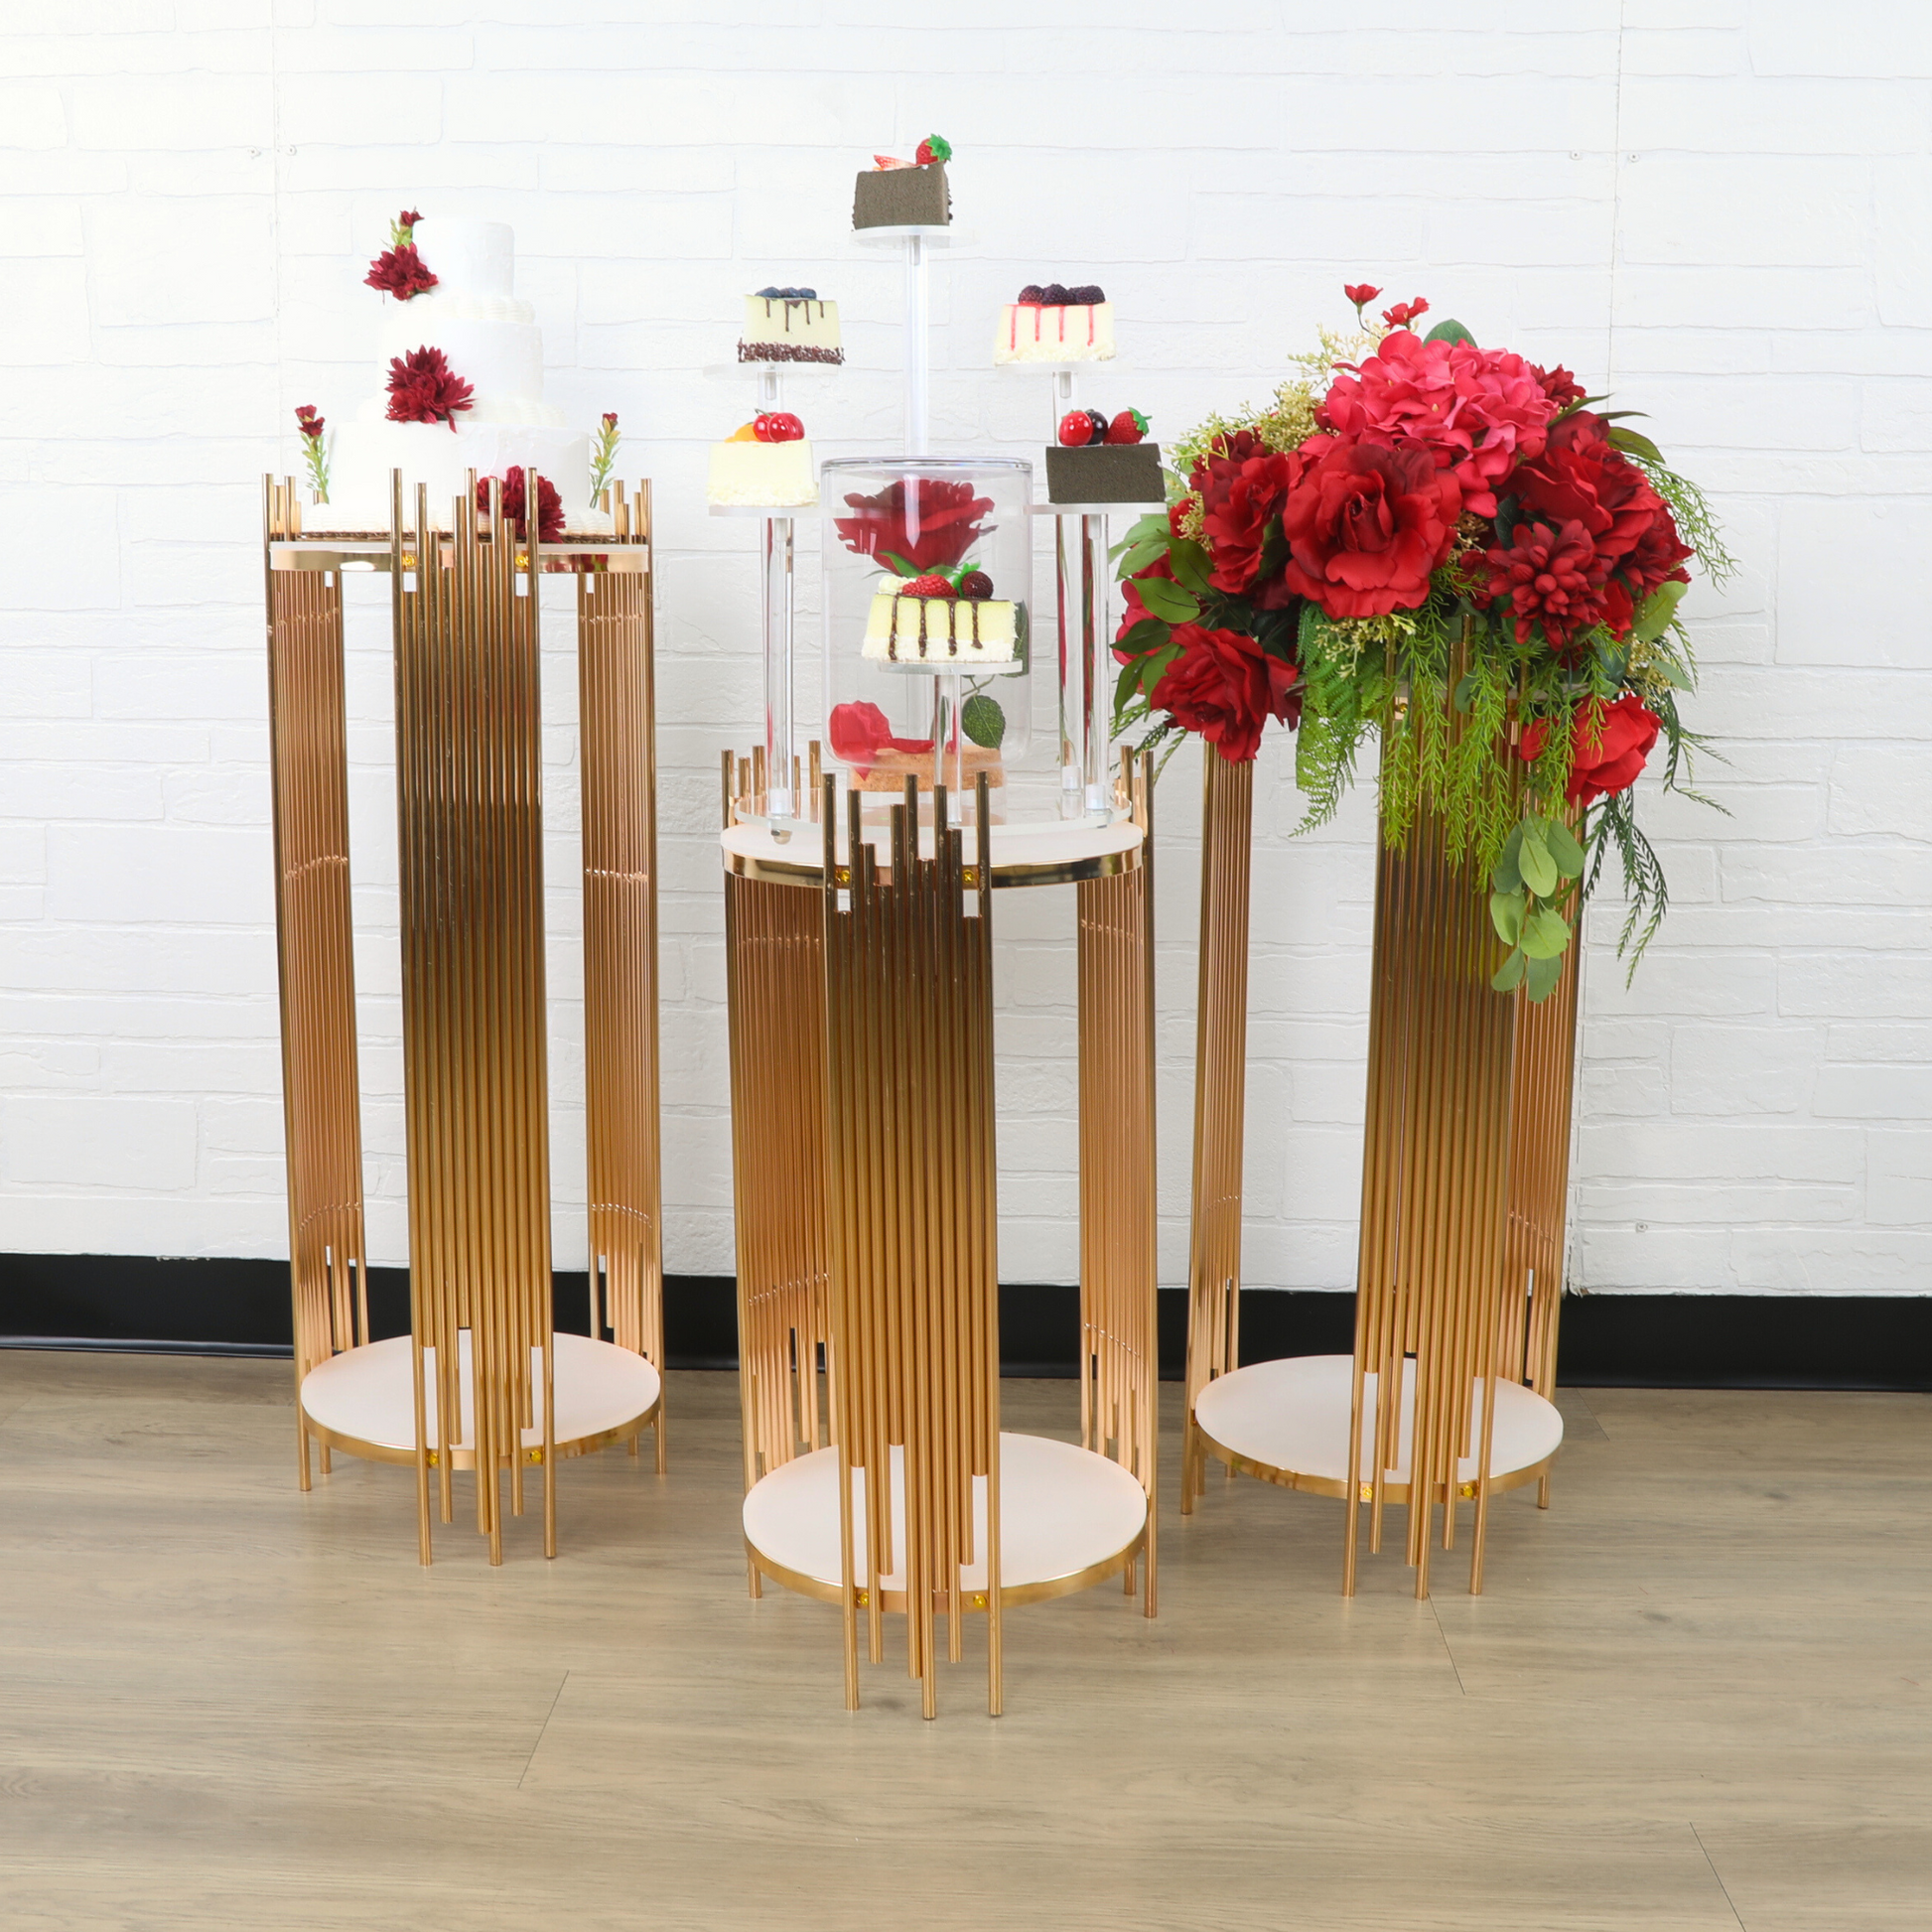 3 pcs of Gold Plinths Round Display Stand